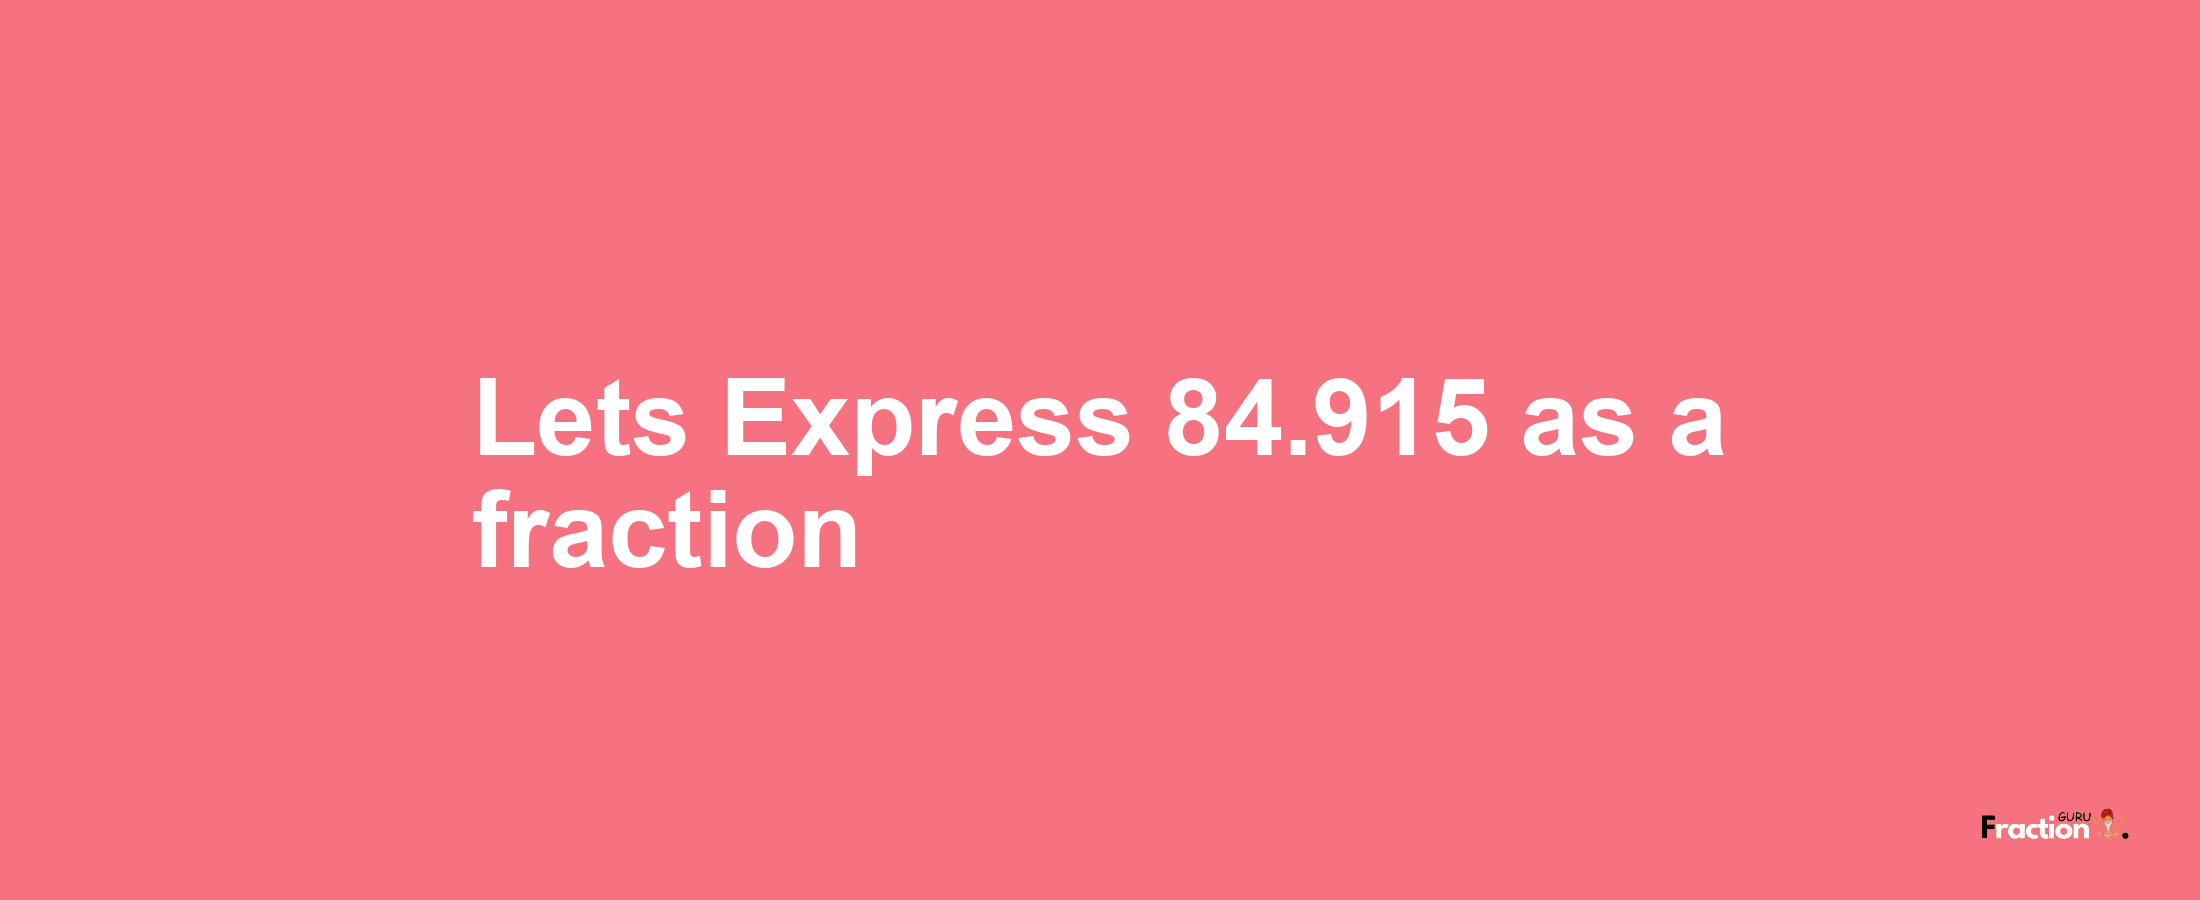 Lets Express 84.915 as afraction